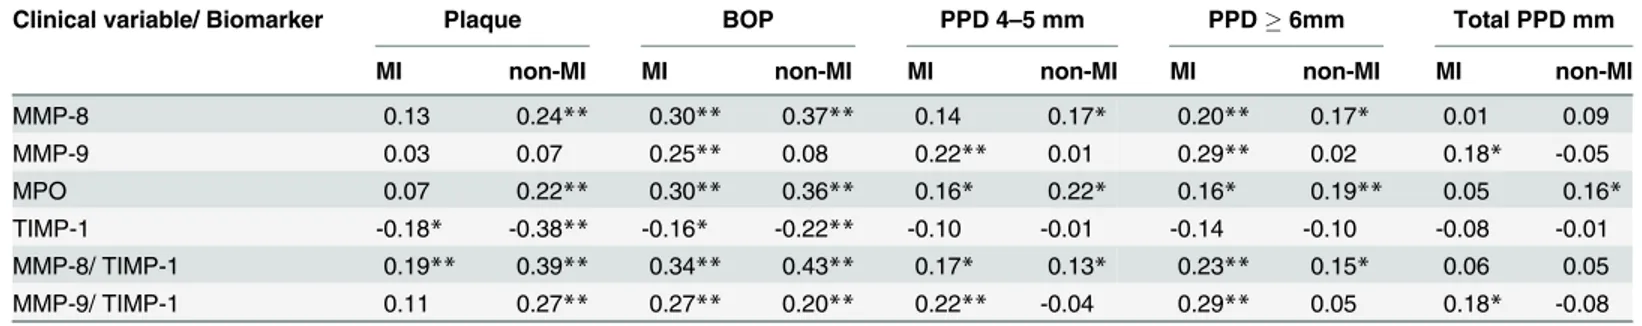 Table 5. Correlations (r) of salivary MMP-8, -9, MPO, TIMP-1 and the ratios of MMP-8 and -9/TIMP-1 measurements and periodontal parameters in MI (n = 200) and non-MI (n = 200) subjects.